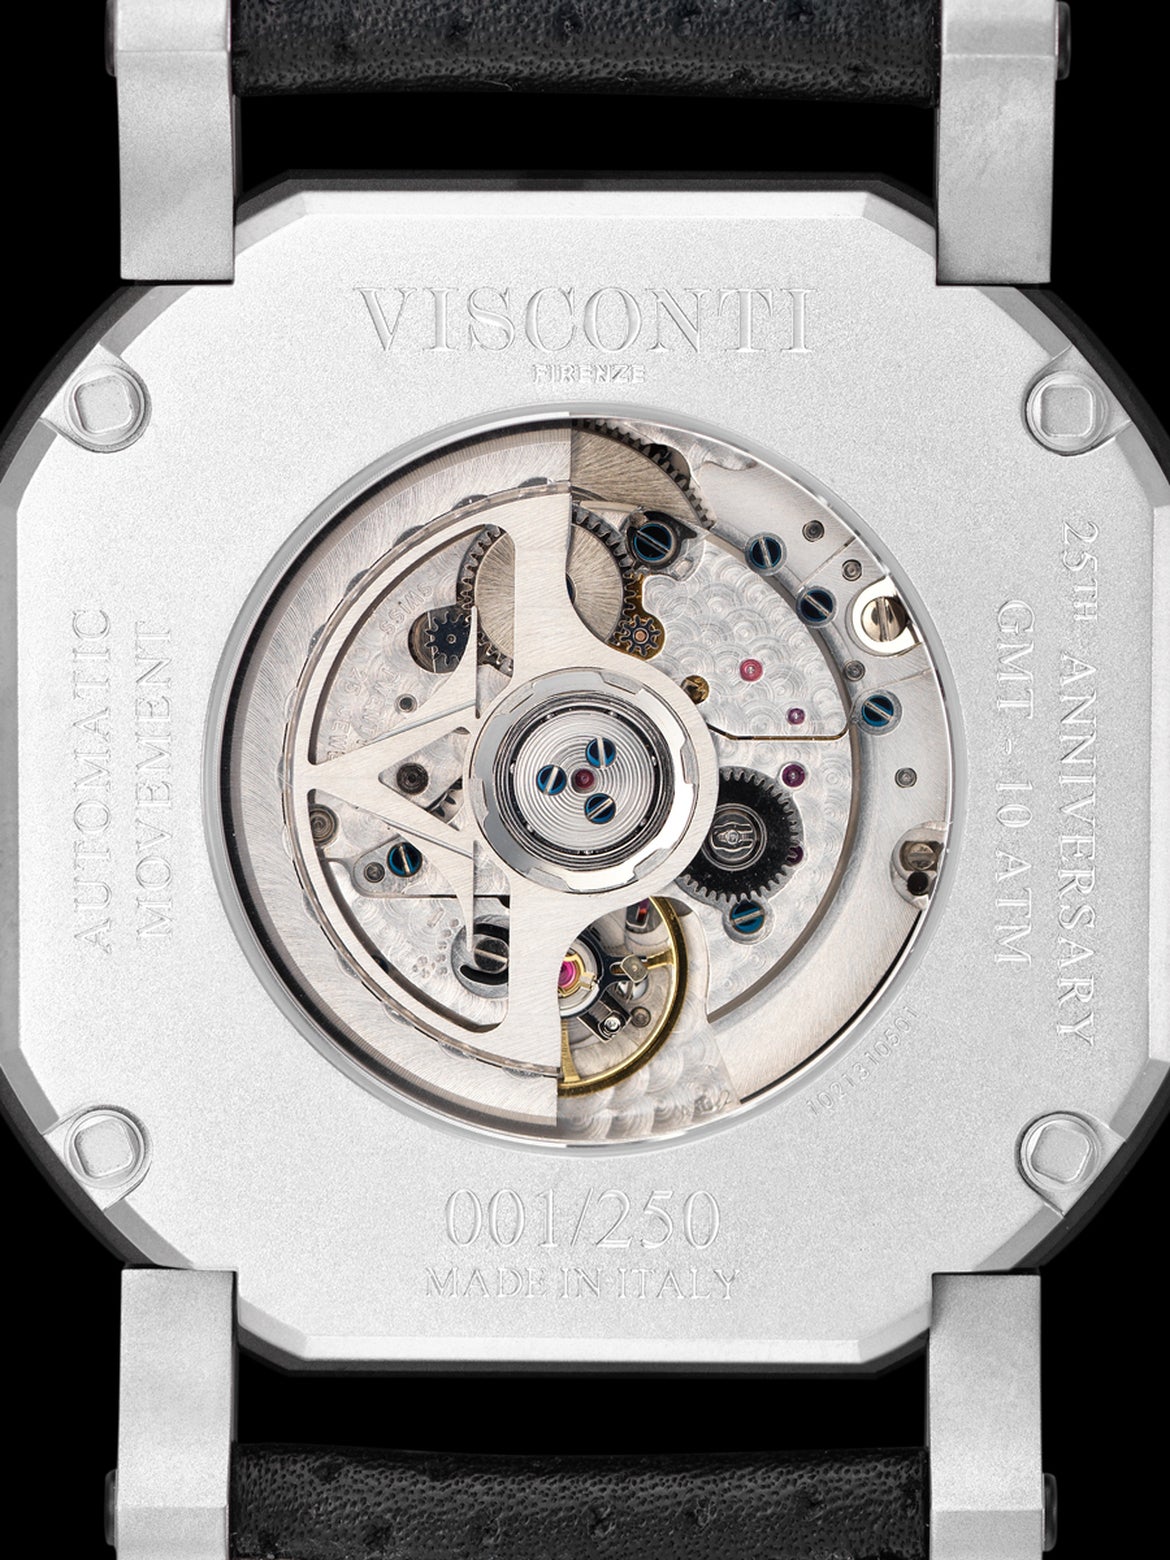 Contemporary Visconti Stainless Steel Elegance GMT Automatic Wristwatch